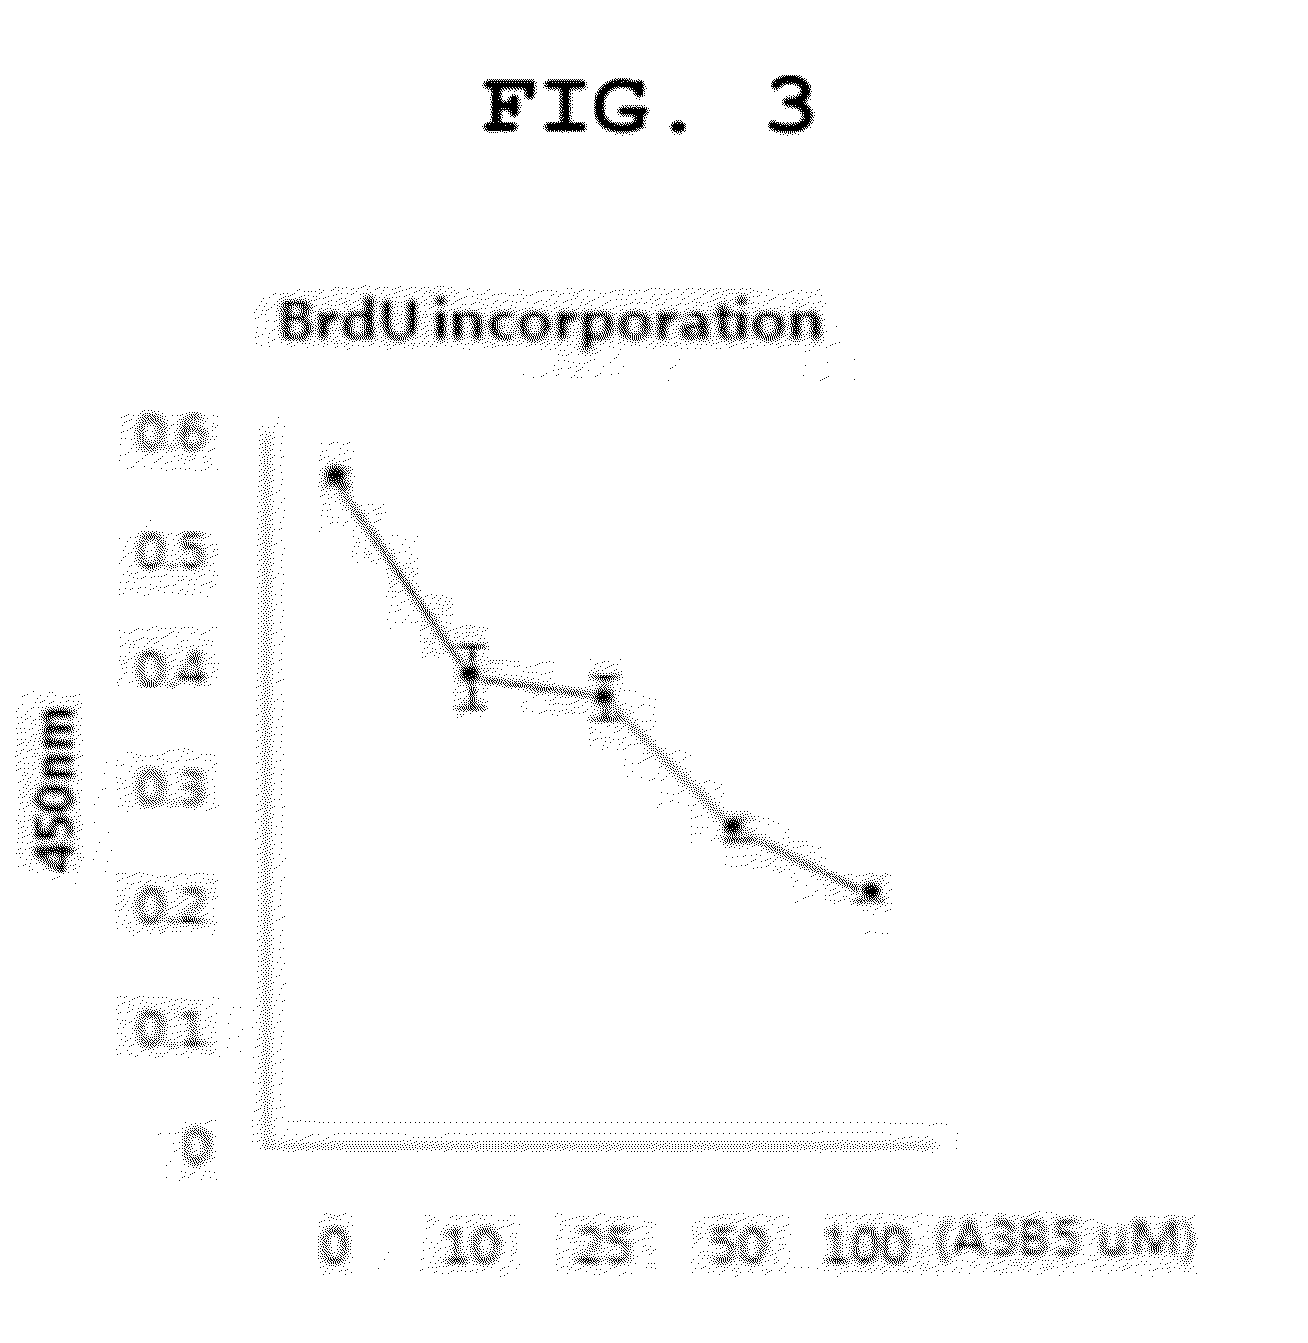 Novel biarylamide derivative and compositions containing the derivative as an active ingredient